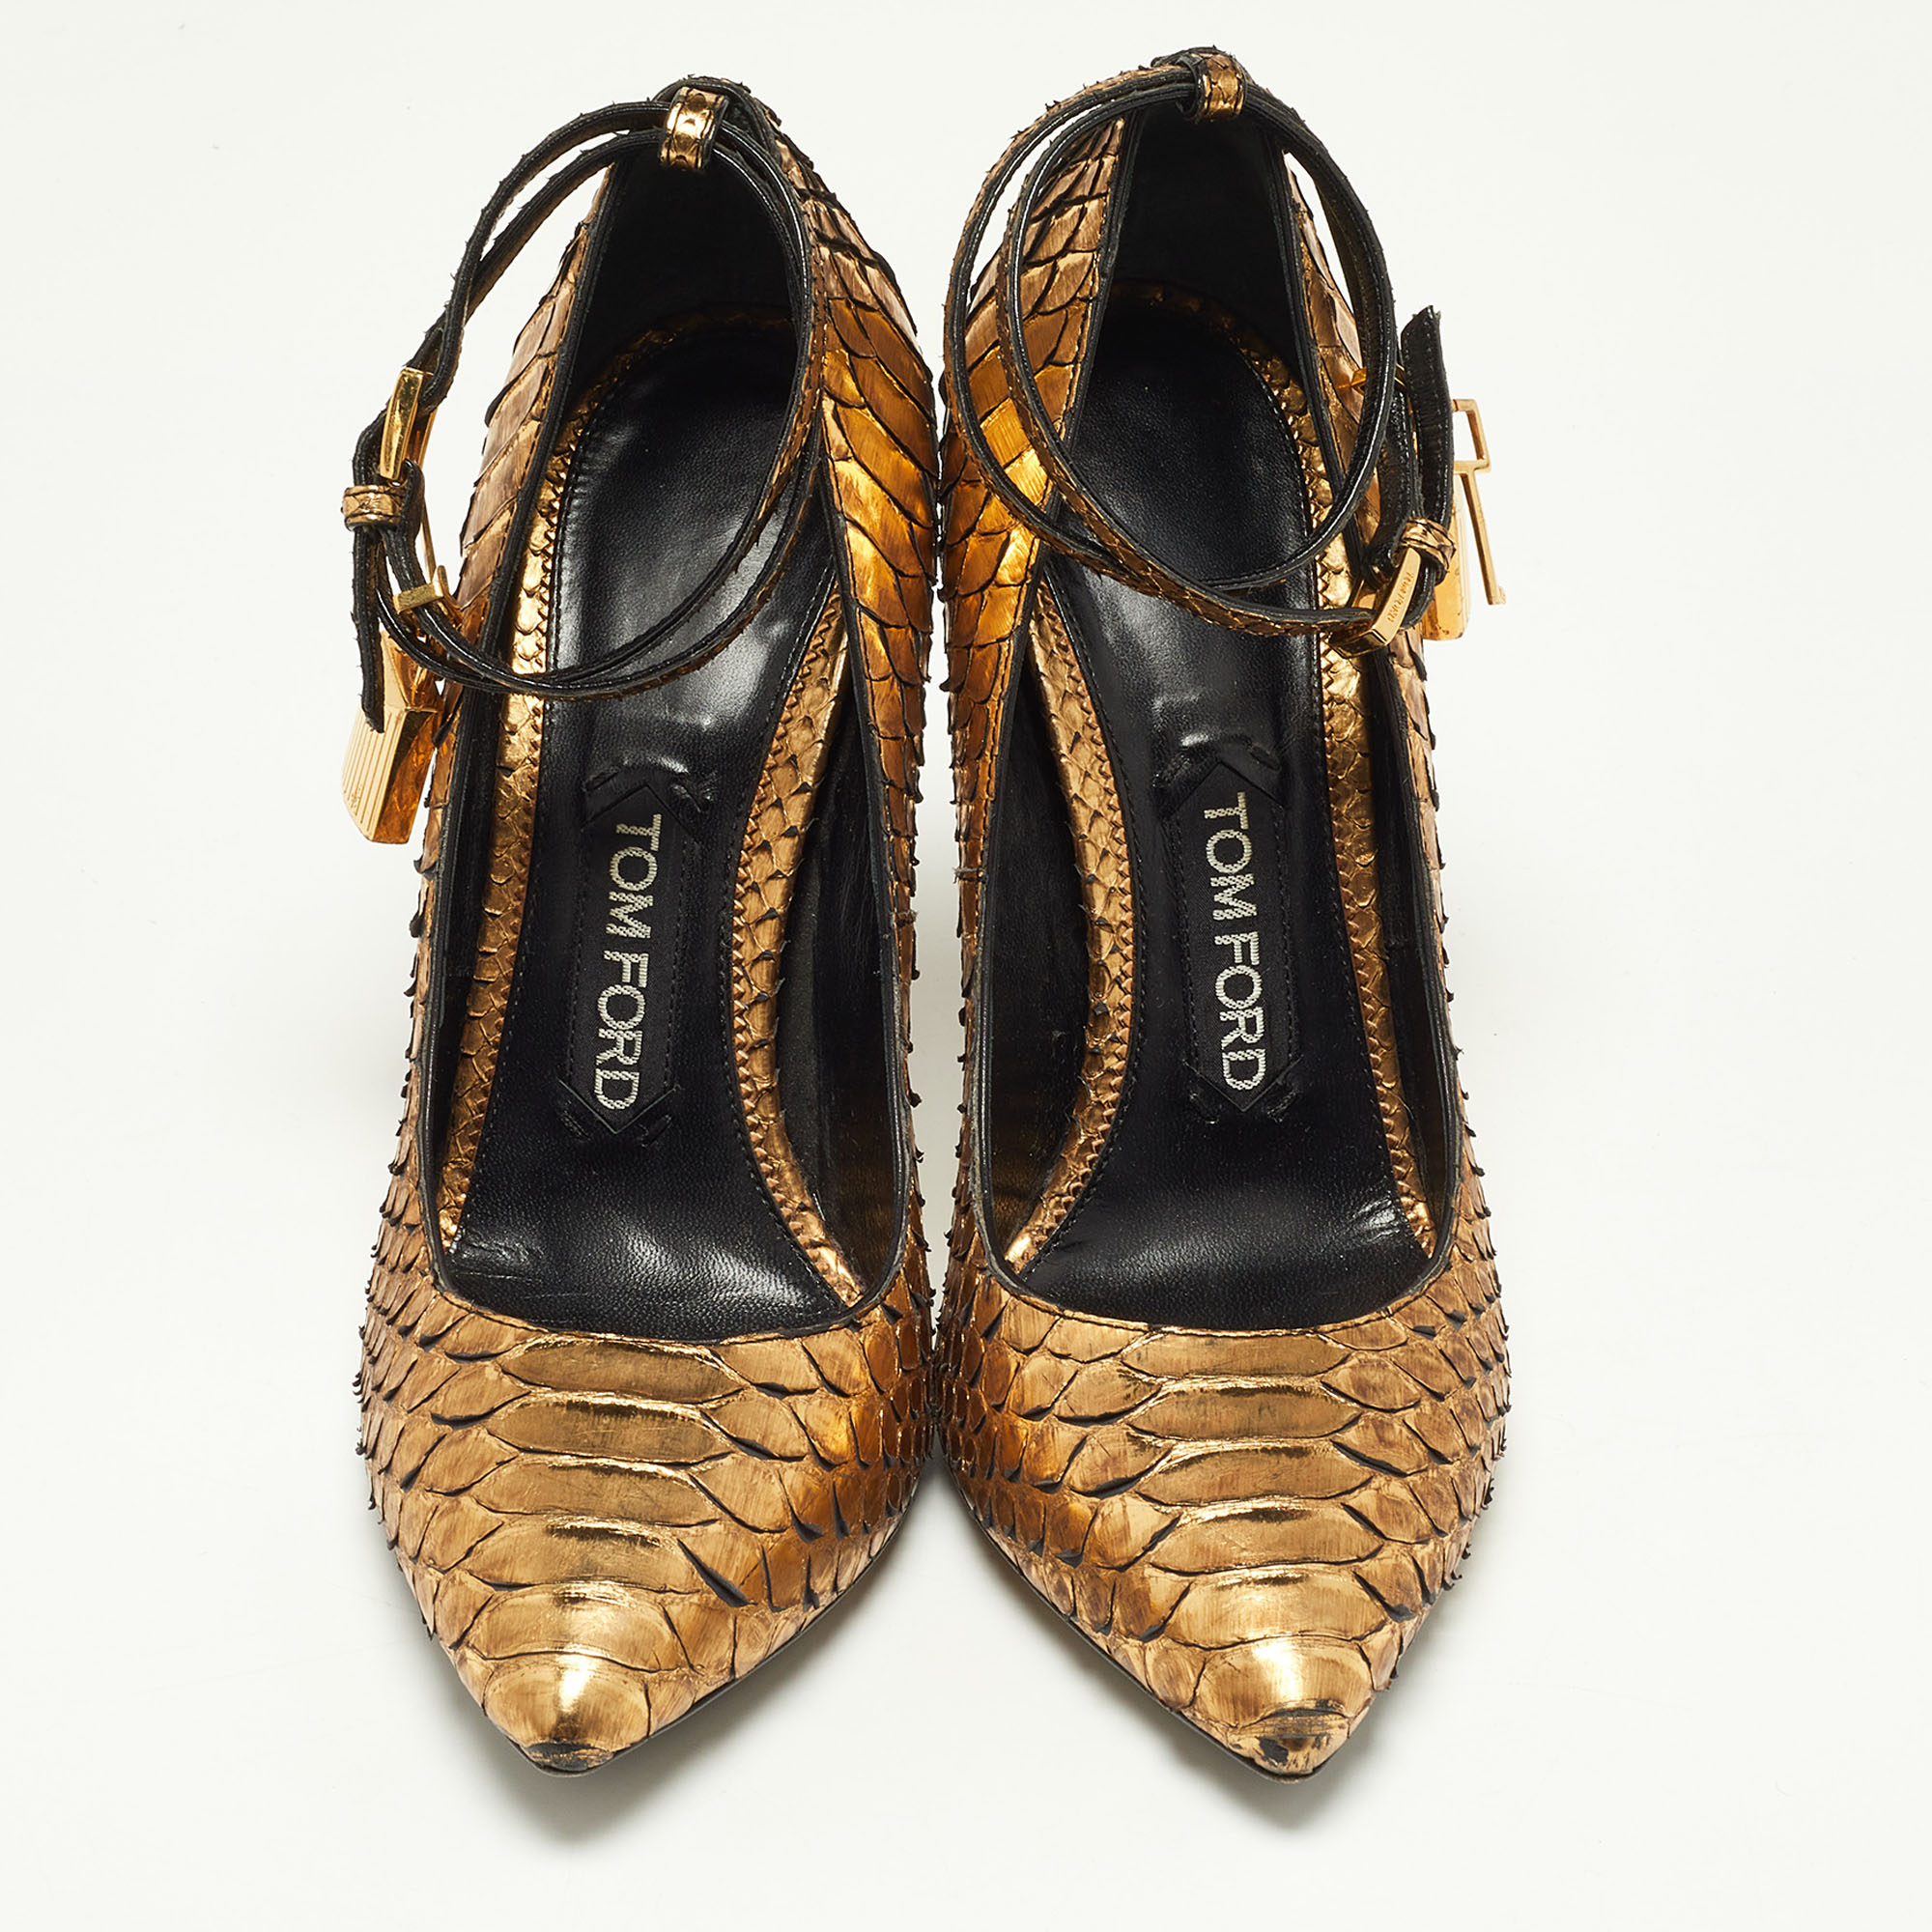 Tom Ford Gold Python Leather Padlock Pumps Size 37.5